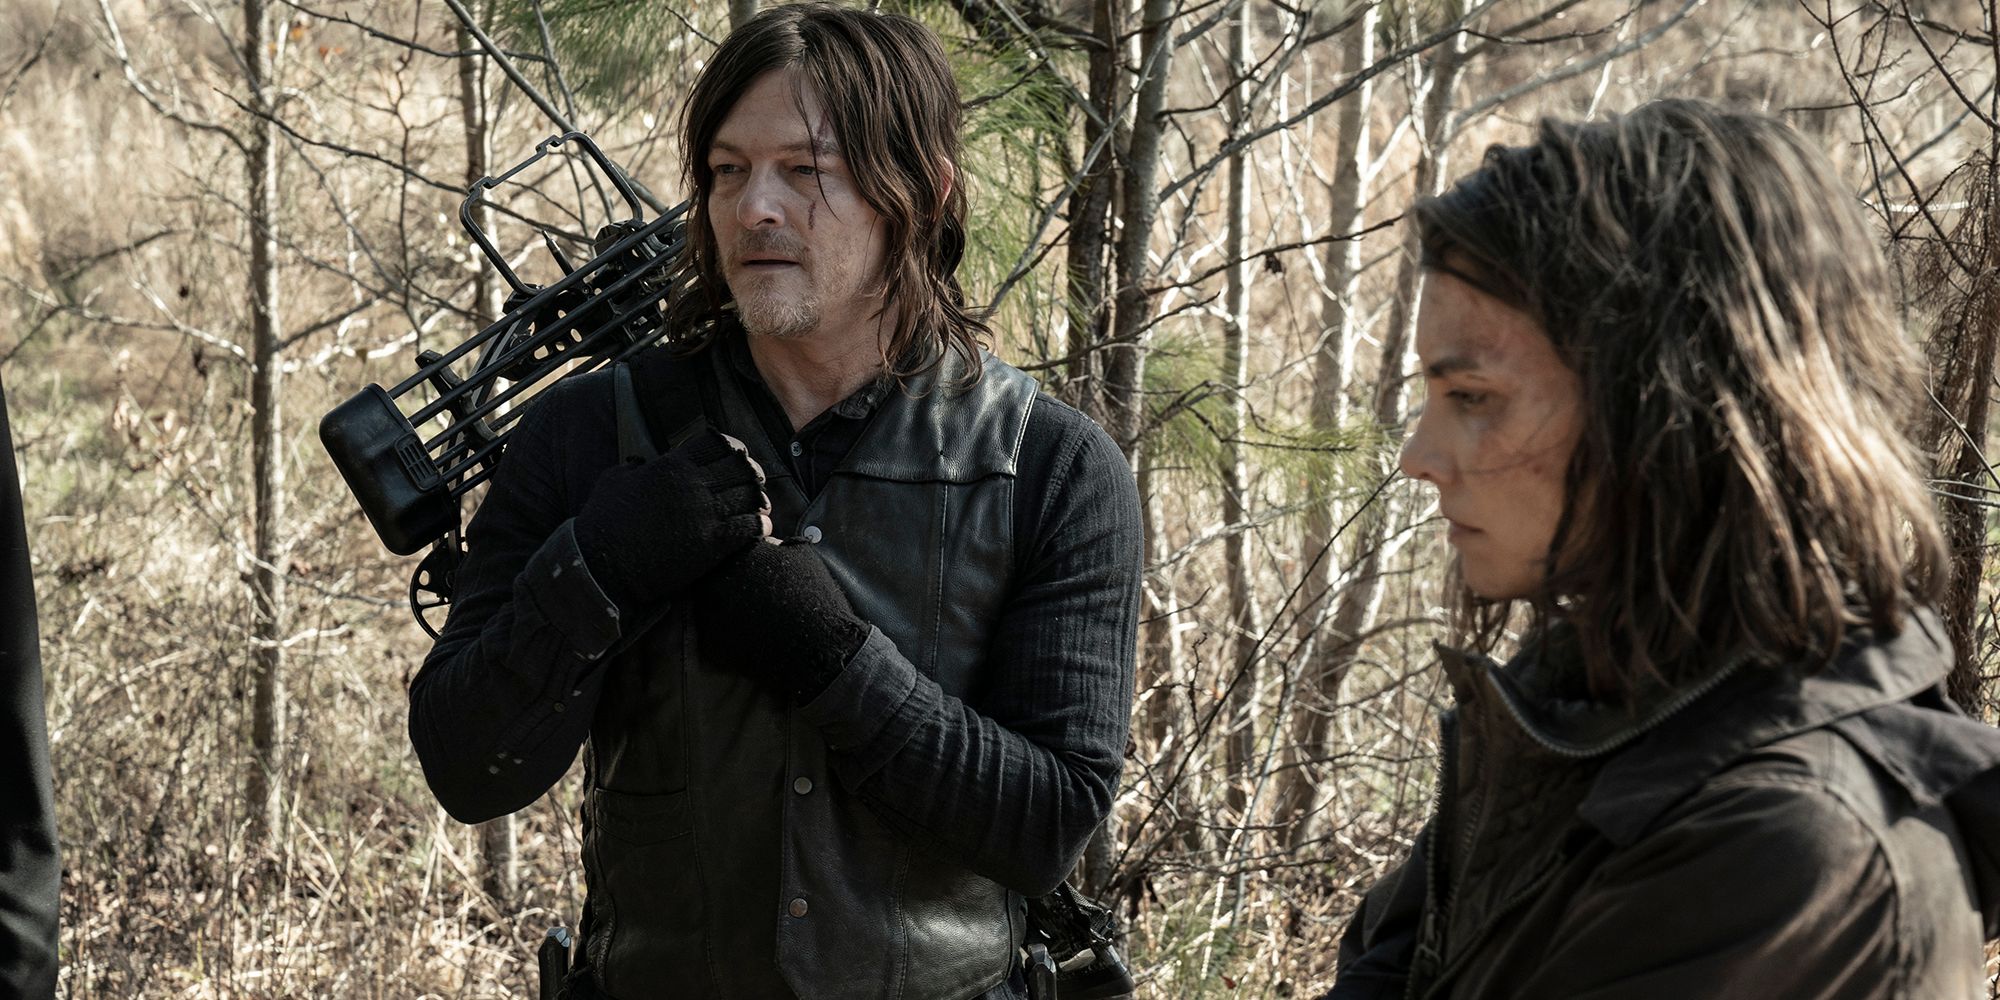 Daryl and Maggie in the woods The Walking Dead season 11 episode 22